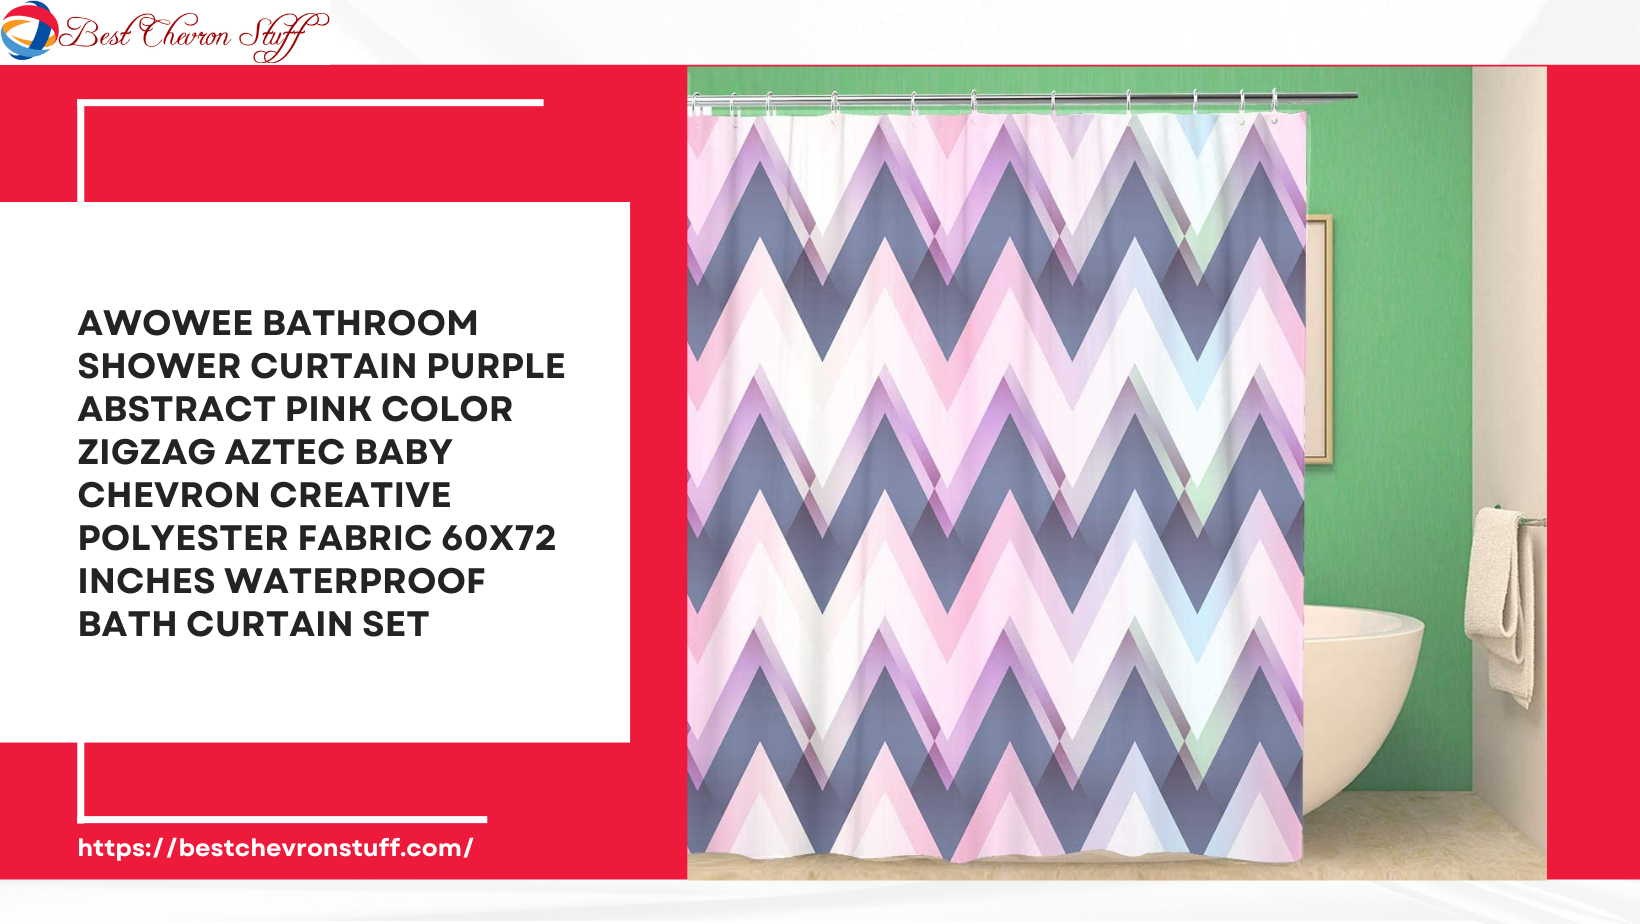 Pink Chevron Fabric Shower Curtain Designs – Affordable and Fun